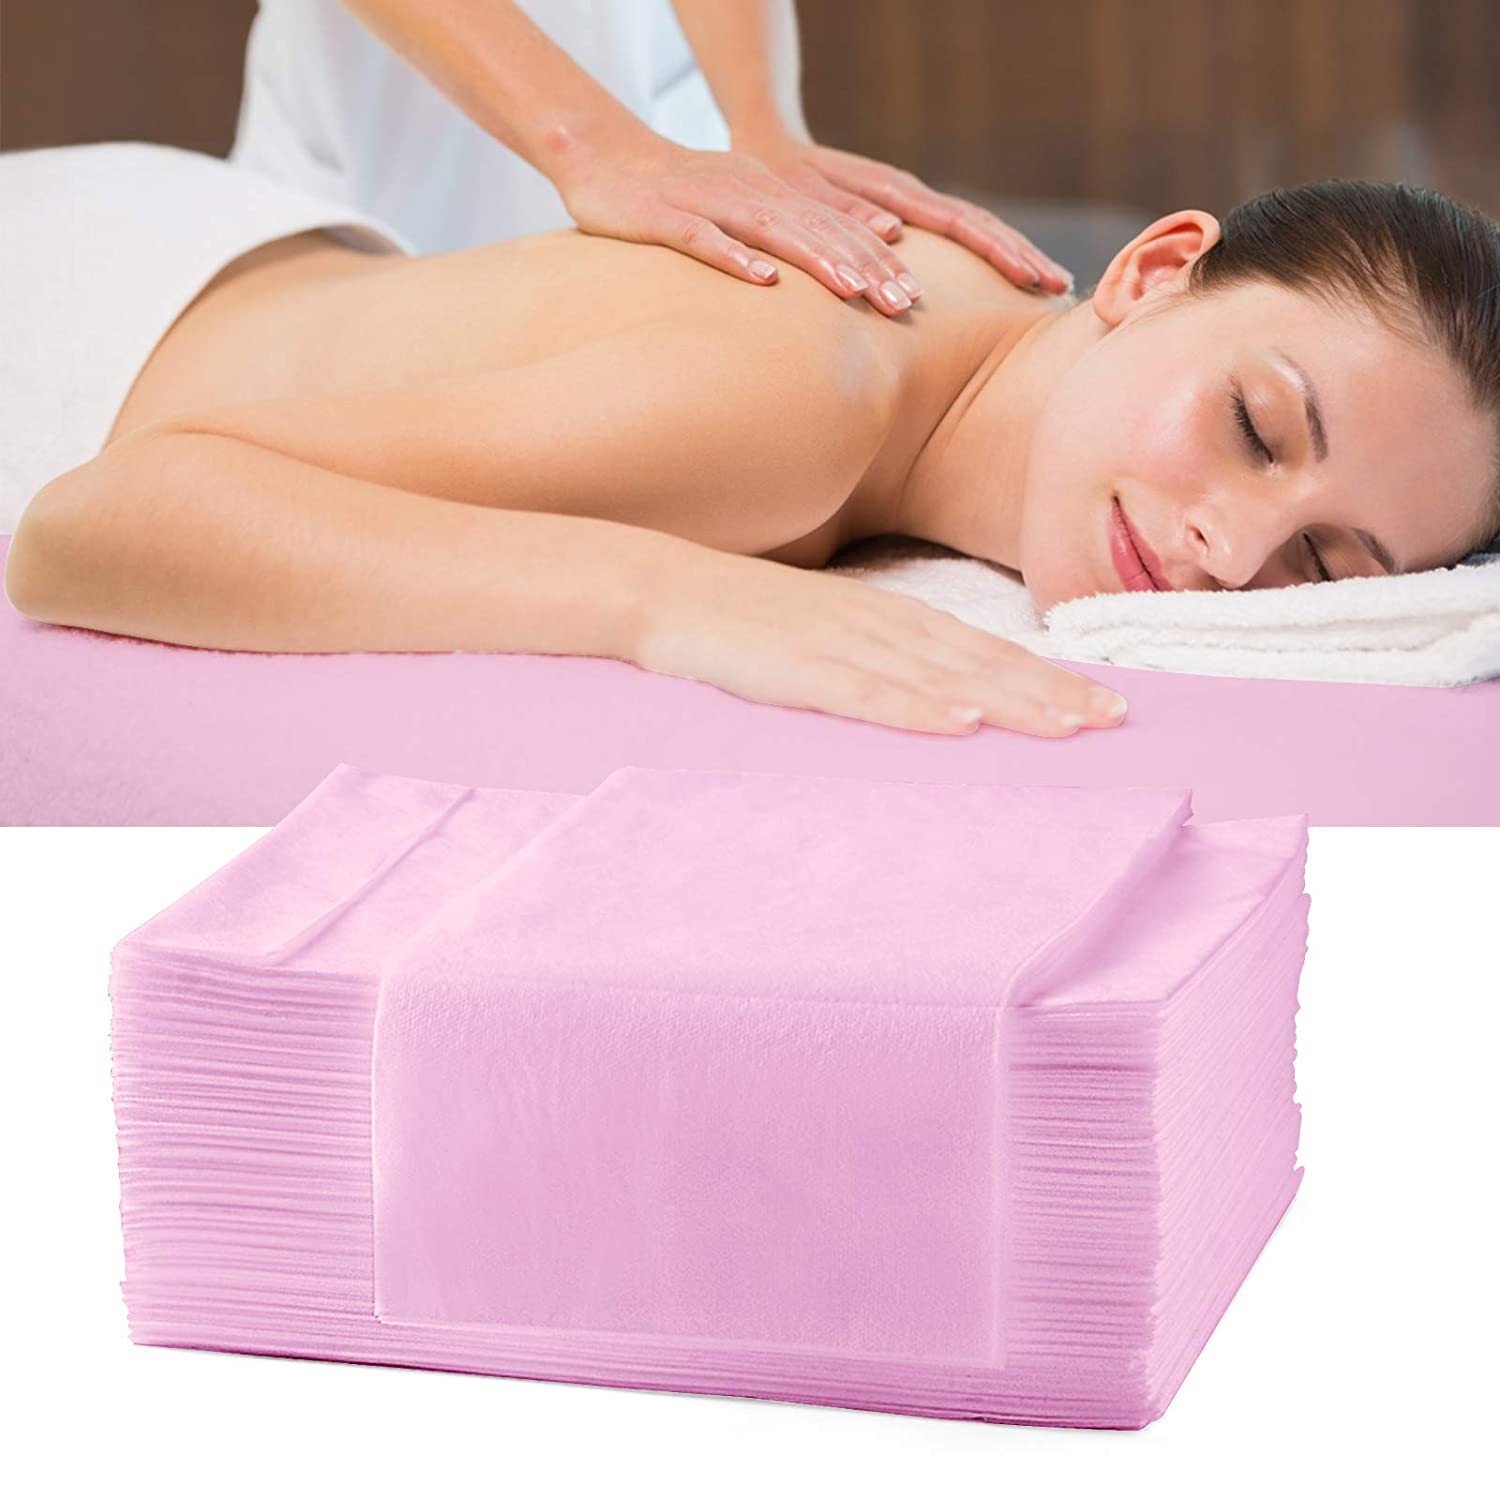 Cheap Medical Consumable Non-woven Fabric Disposable Bed Sheet For Massage Beauty Spa wholesale